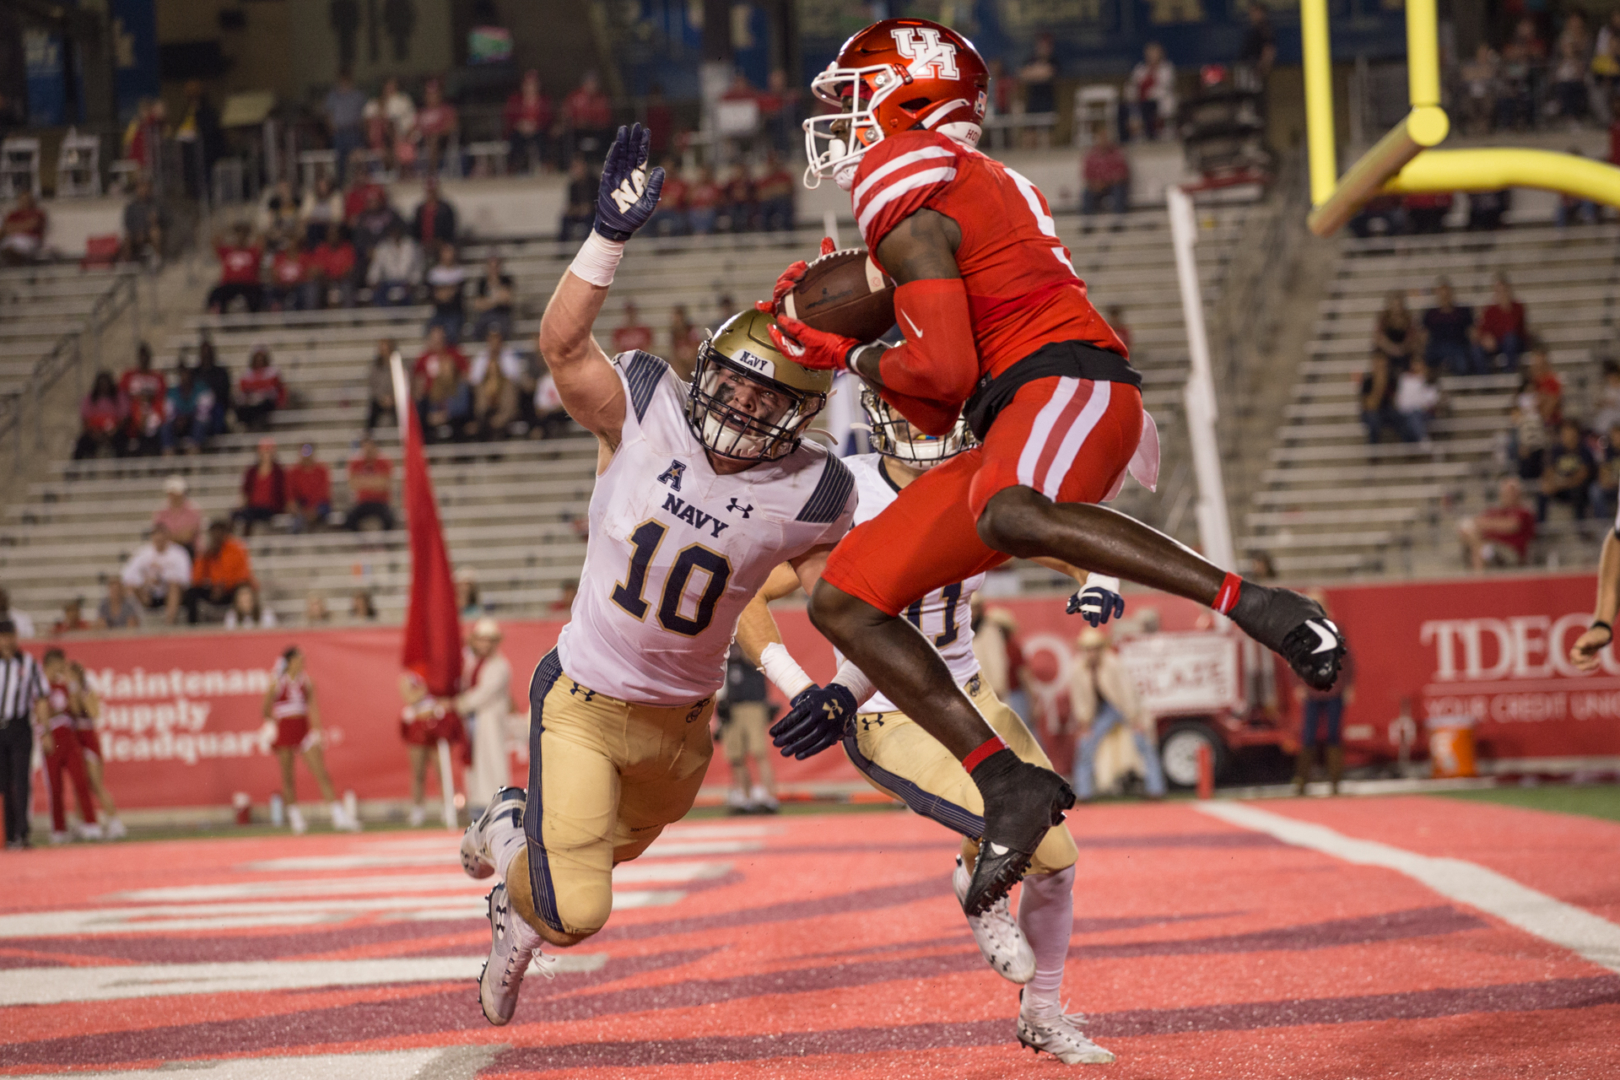 UH receiver Marquez Stevenson skies over Navy safety Kevin Brennan in the end zone during an AAC battle in the 2019 season at TDECU Stadium. | Trevor Nolley/The Cougar